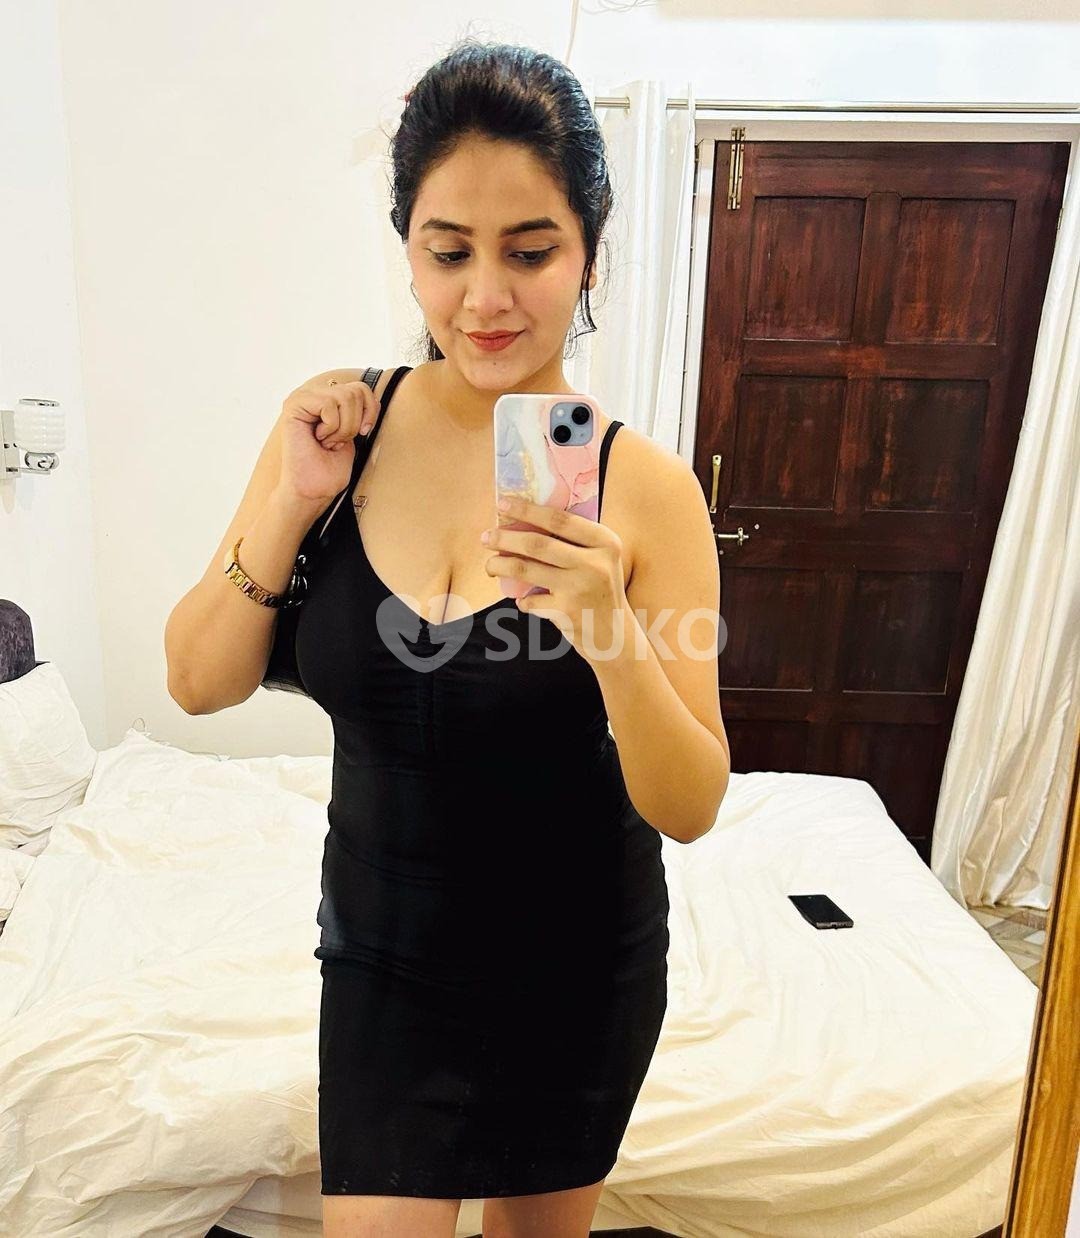 NANDINI LAYOUT 💥 ESCORT INDEPENDENT-CALL GIRLS AVAILABLE WITH PLACE CHEAP RATE. .,,,,,,,₹+₹+₹!"